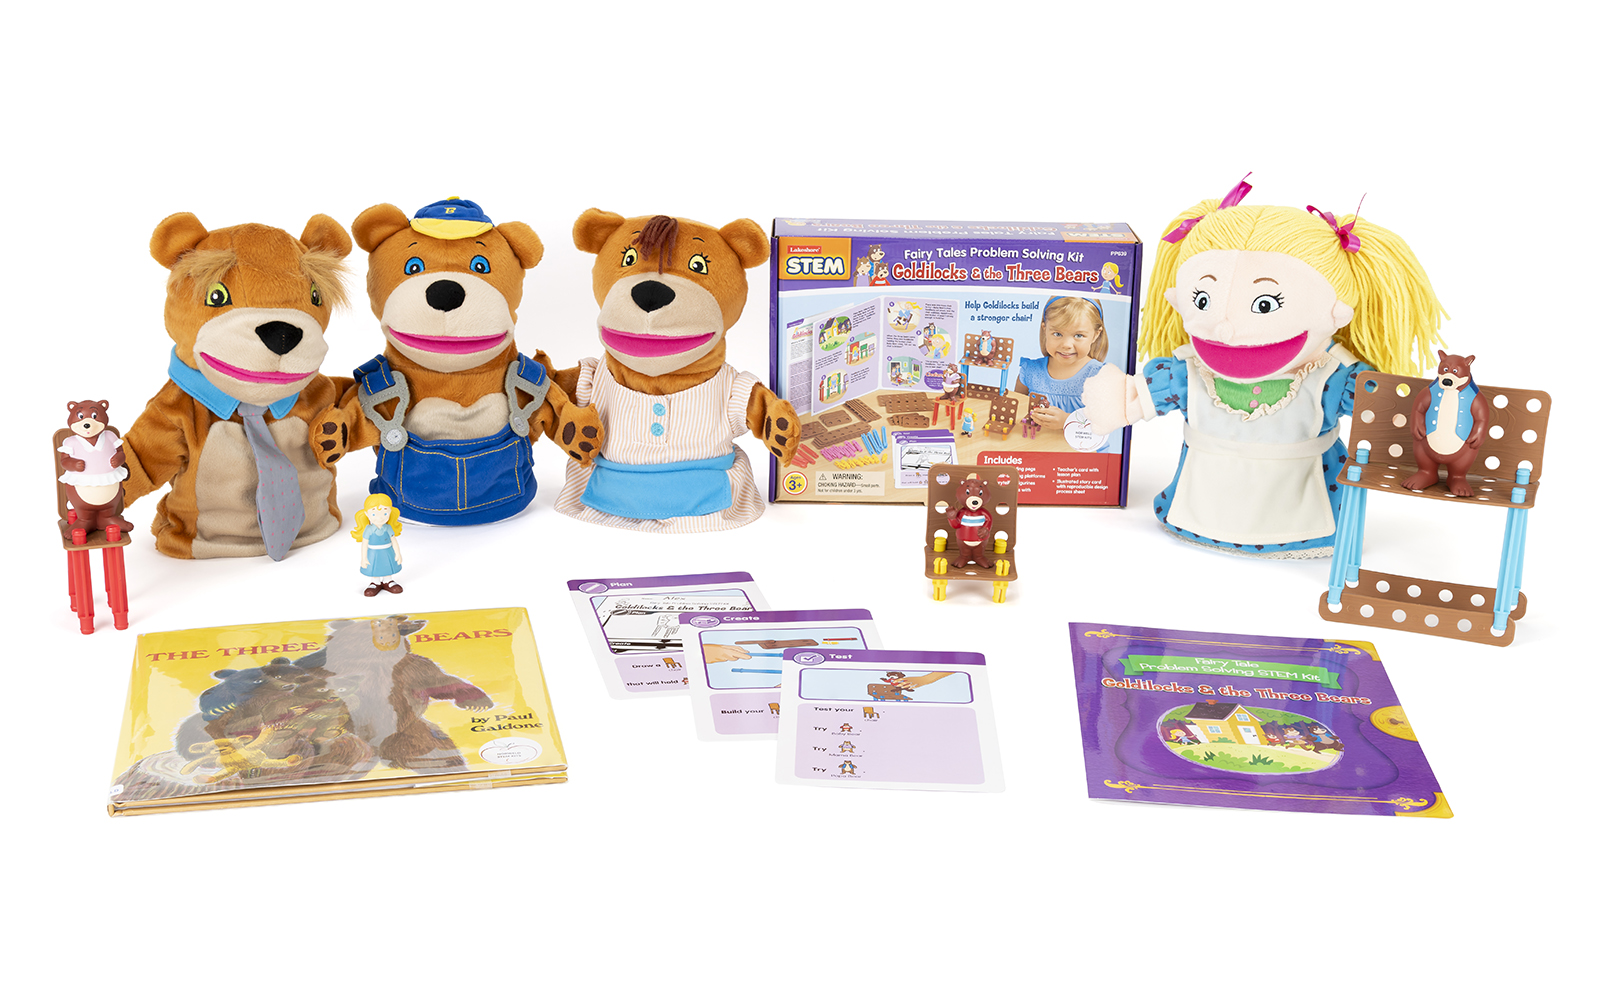 Contents of the Goldilocks and the Three Bears STEAM Puppets Early Literacy Kit